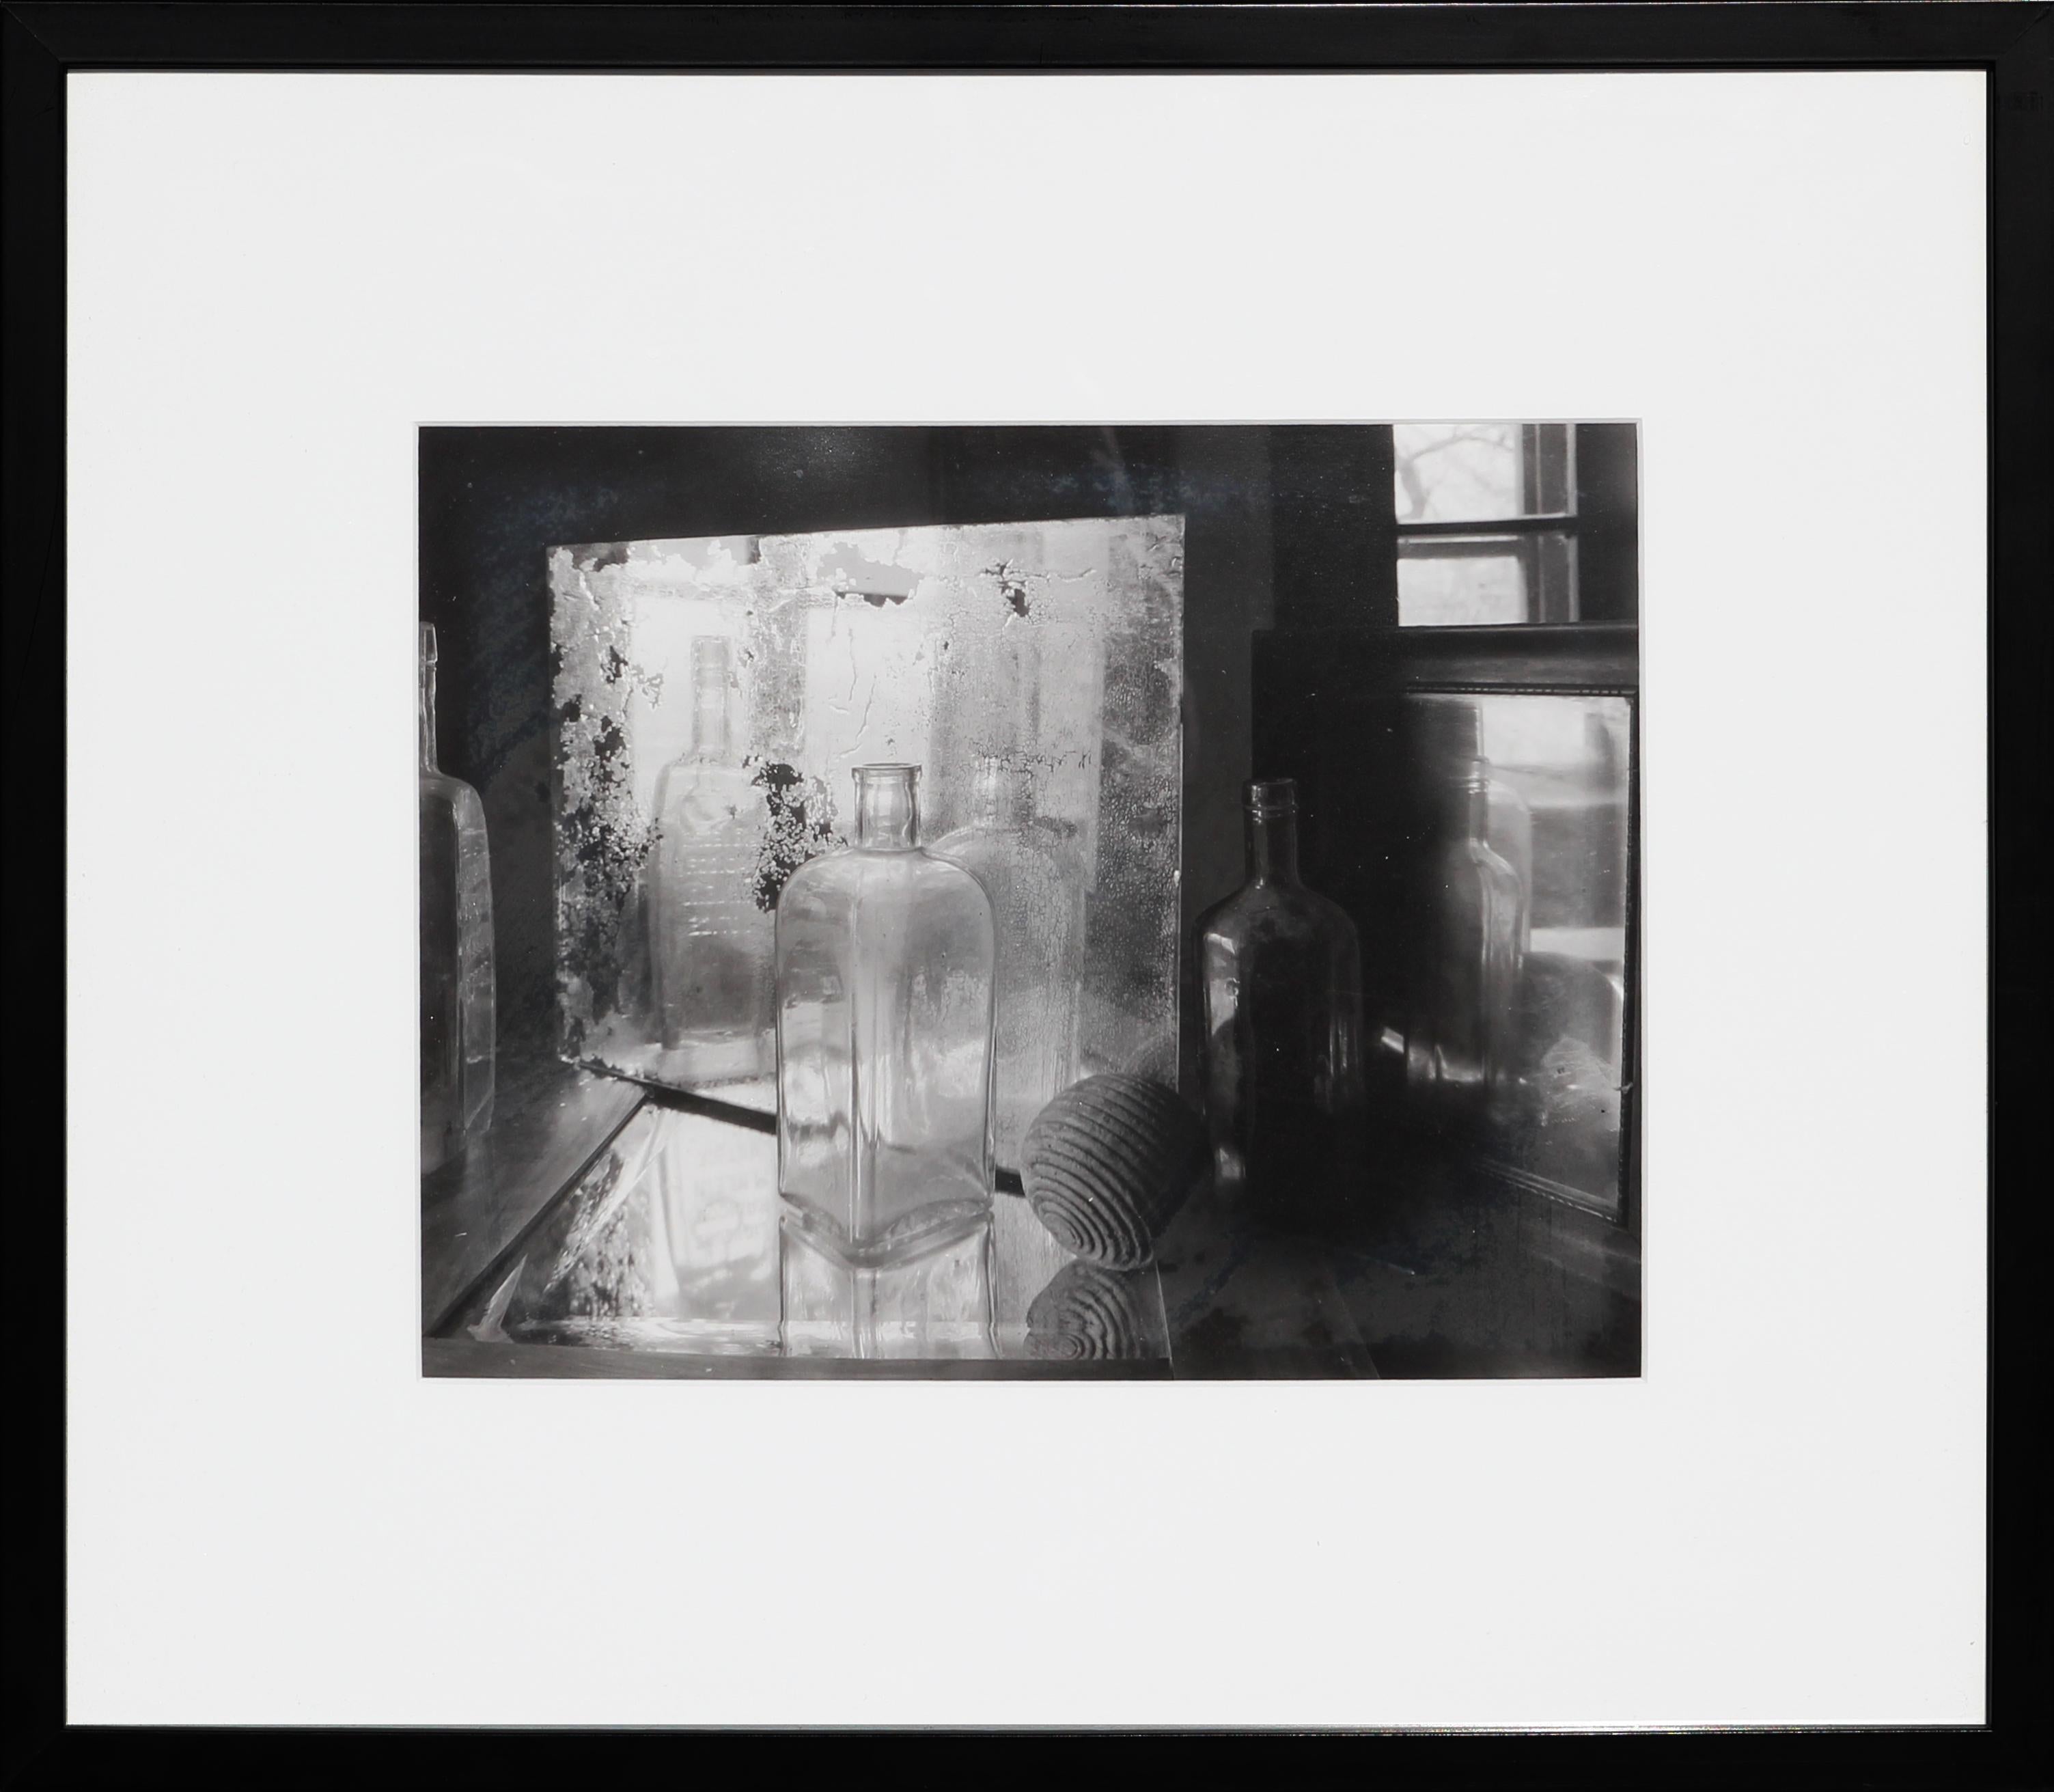 Jan Reich Black and White Photograph - "Still Life III" Black & White Silver Gelatin Photograph of Bottles and Mirrors